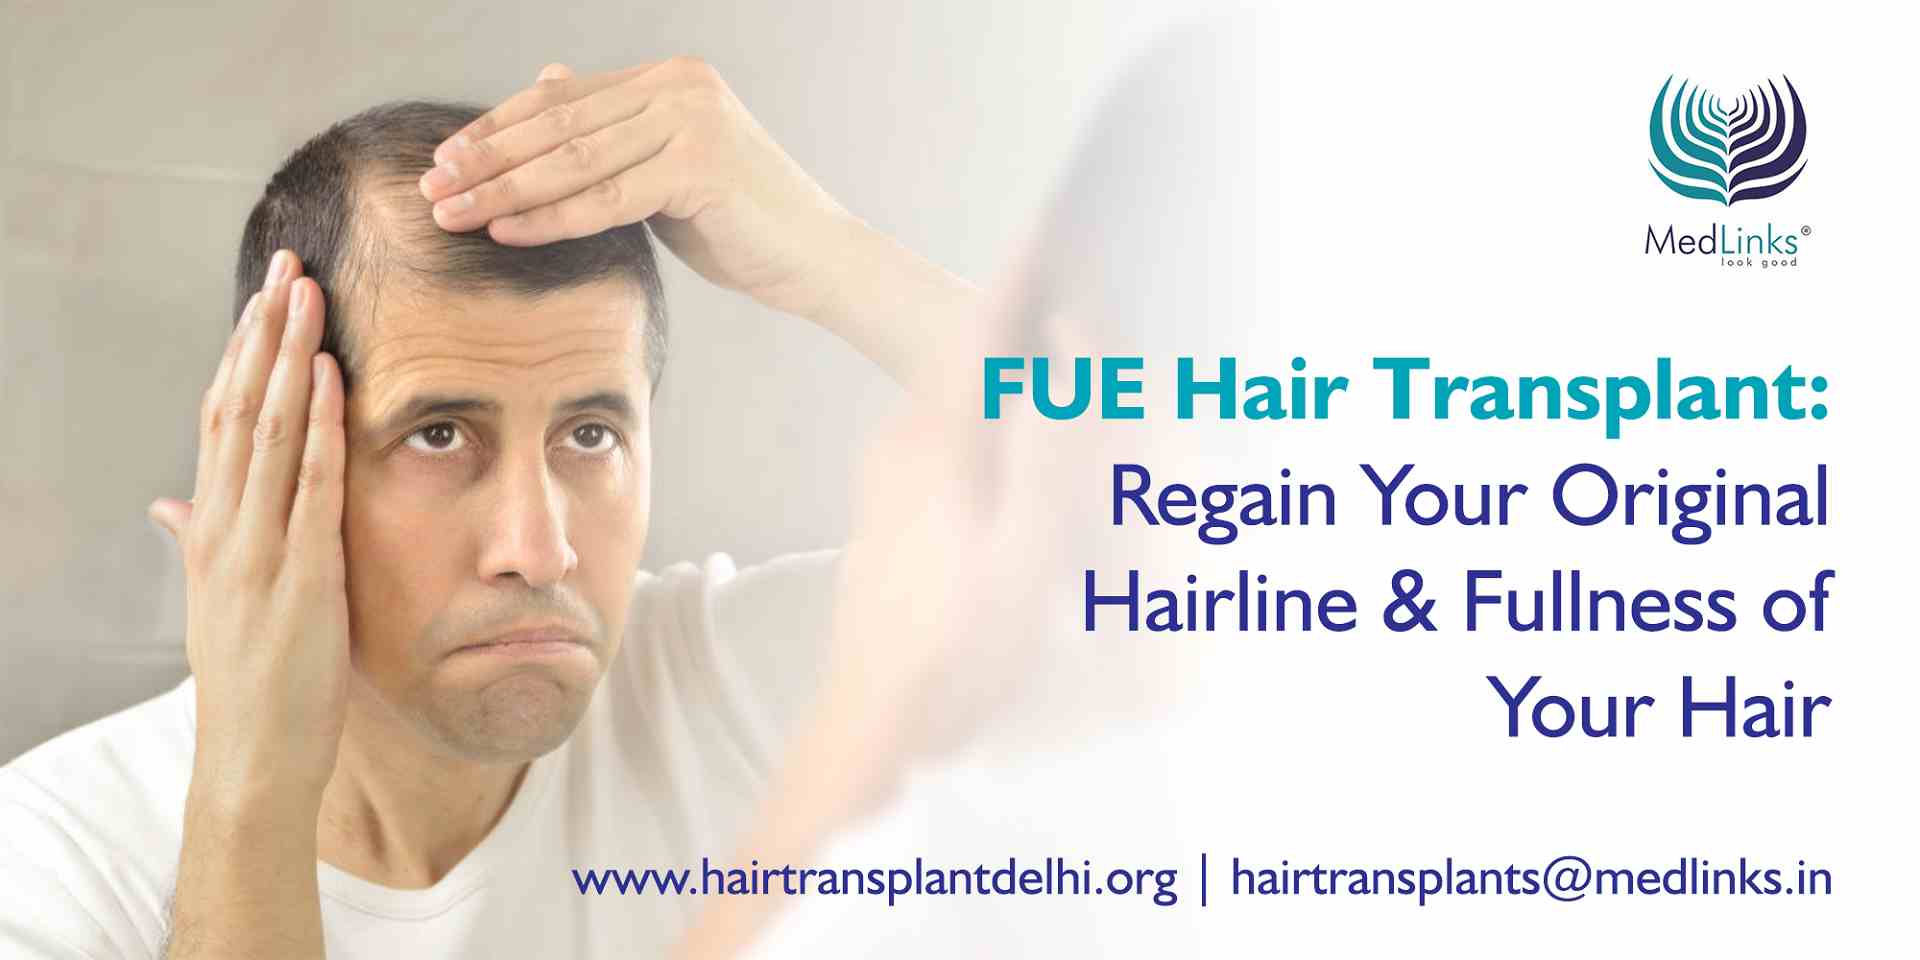 When Should You Exercise and Do Yoga After Having a Hair Transplant